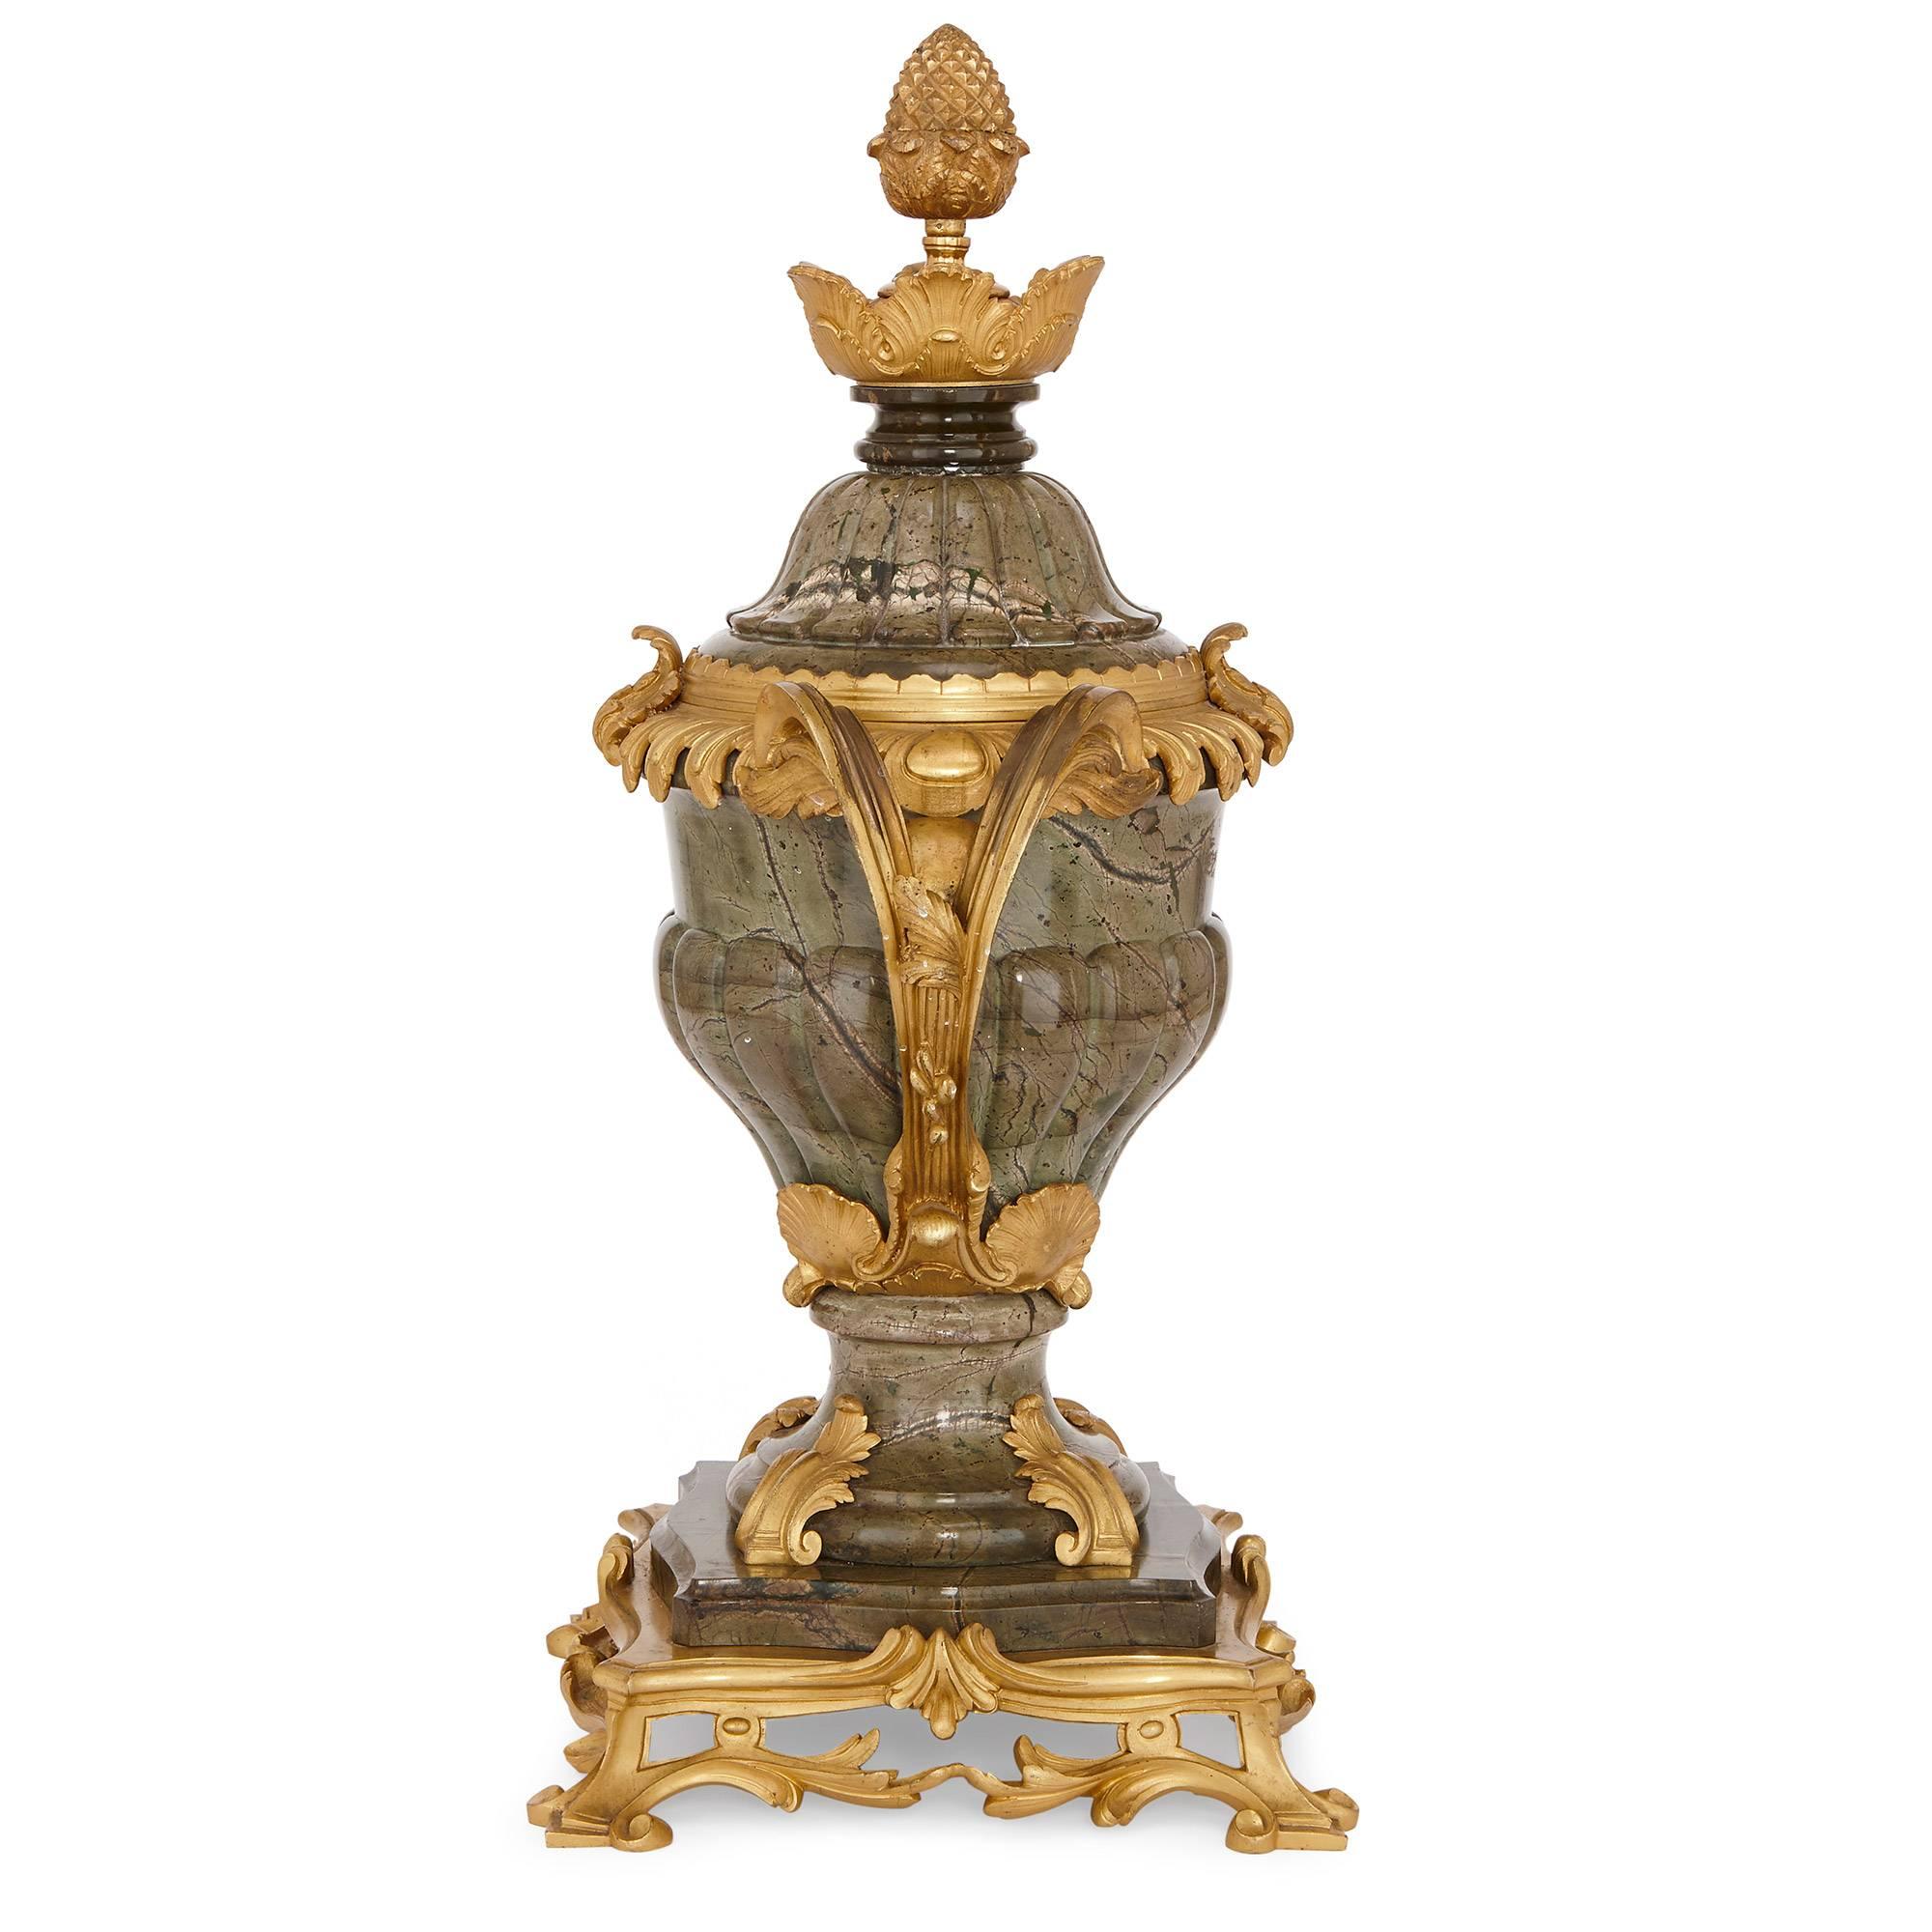 This exuberantly designed lidded urn is carved in veined green marble. The body of the urn is of canted ovoid shape and mounted with twin acanthus leaf ormolu handles. The body of the urn features fluting which tapers inwards towards the waisted